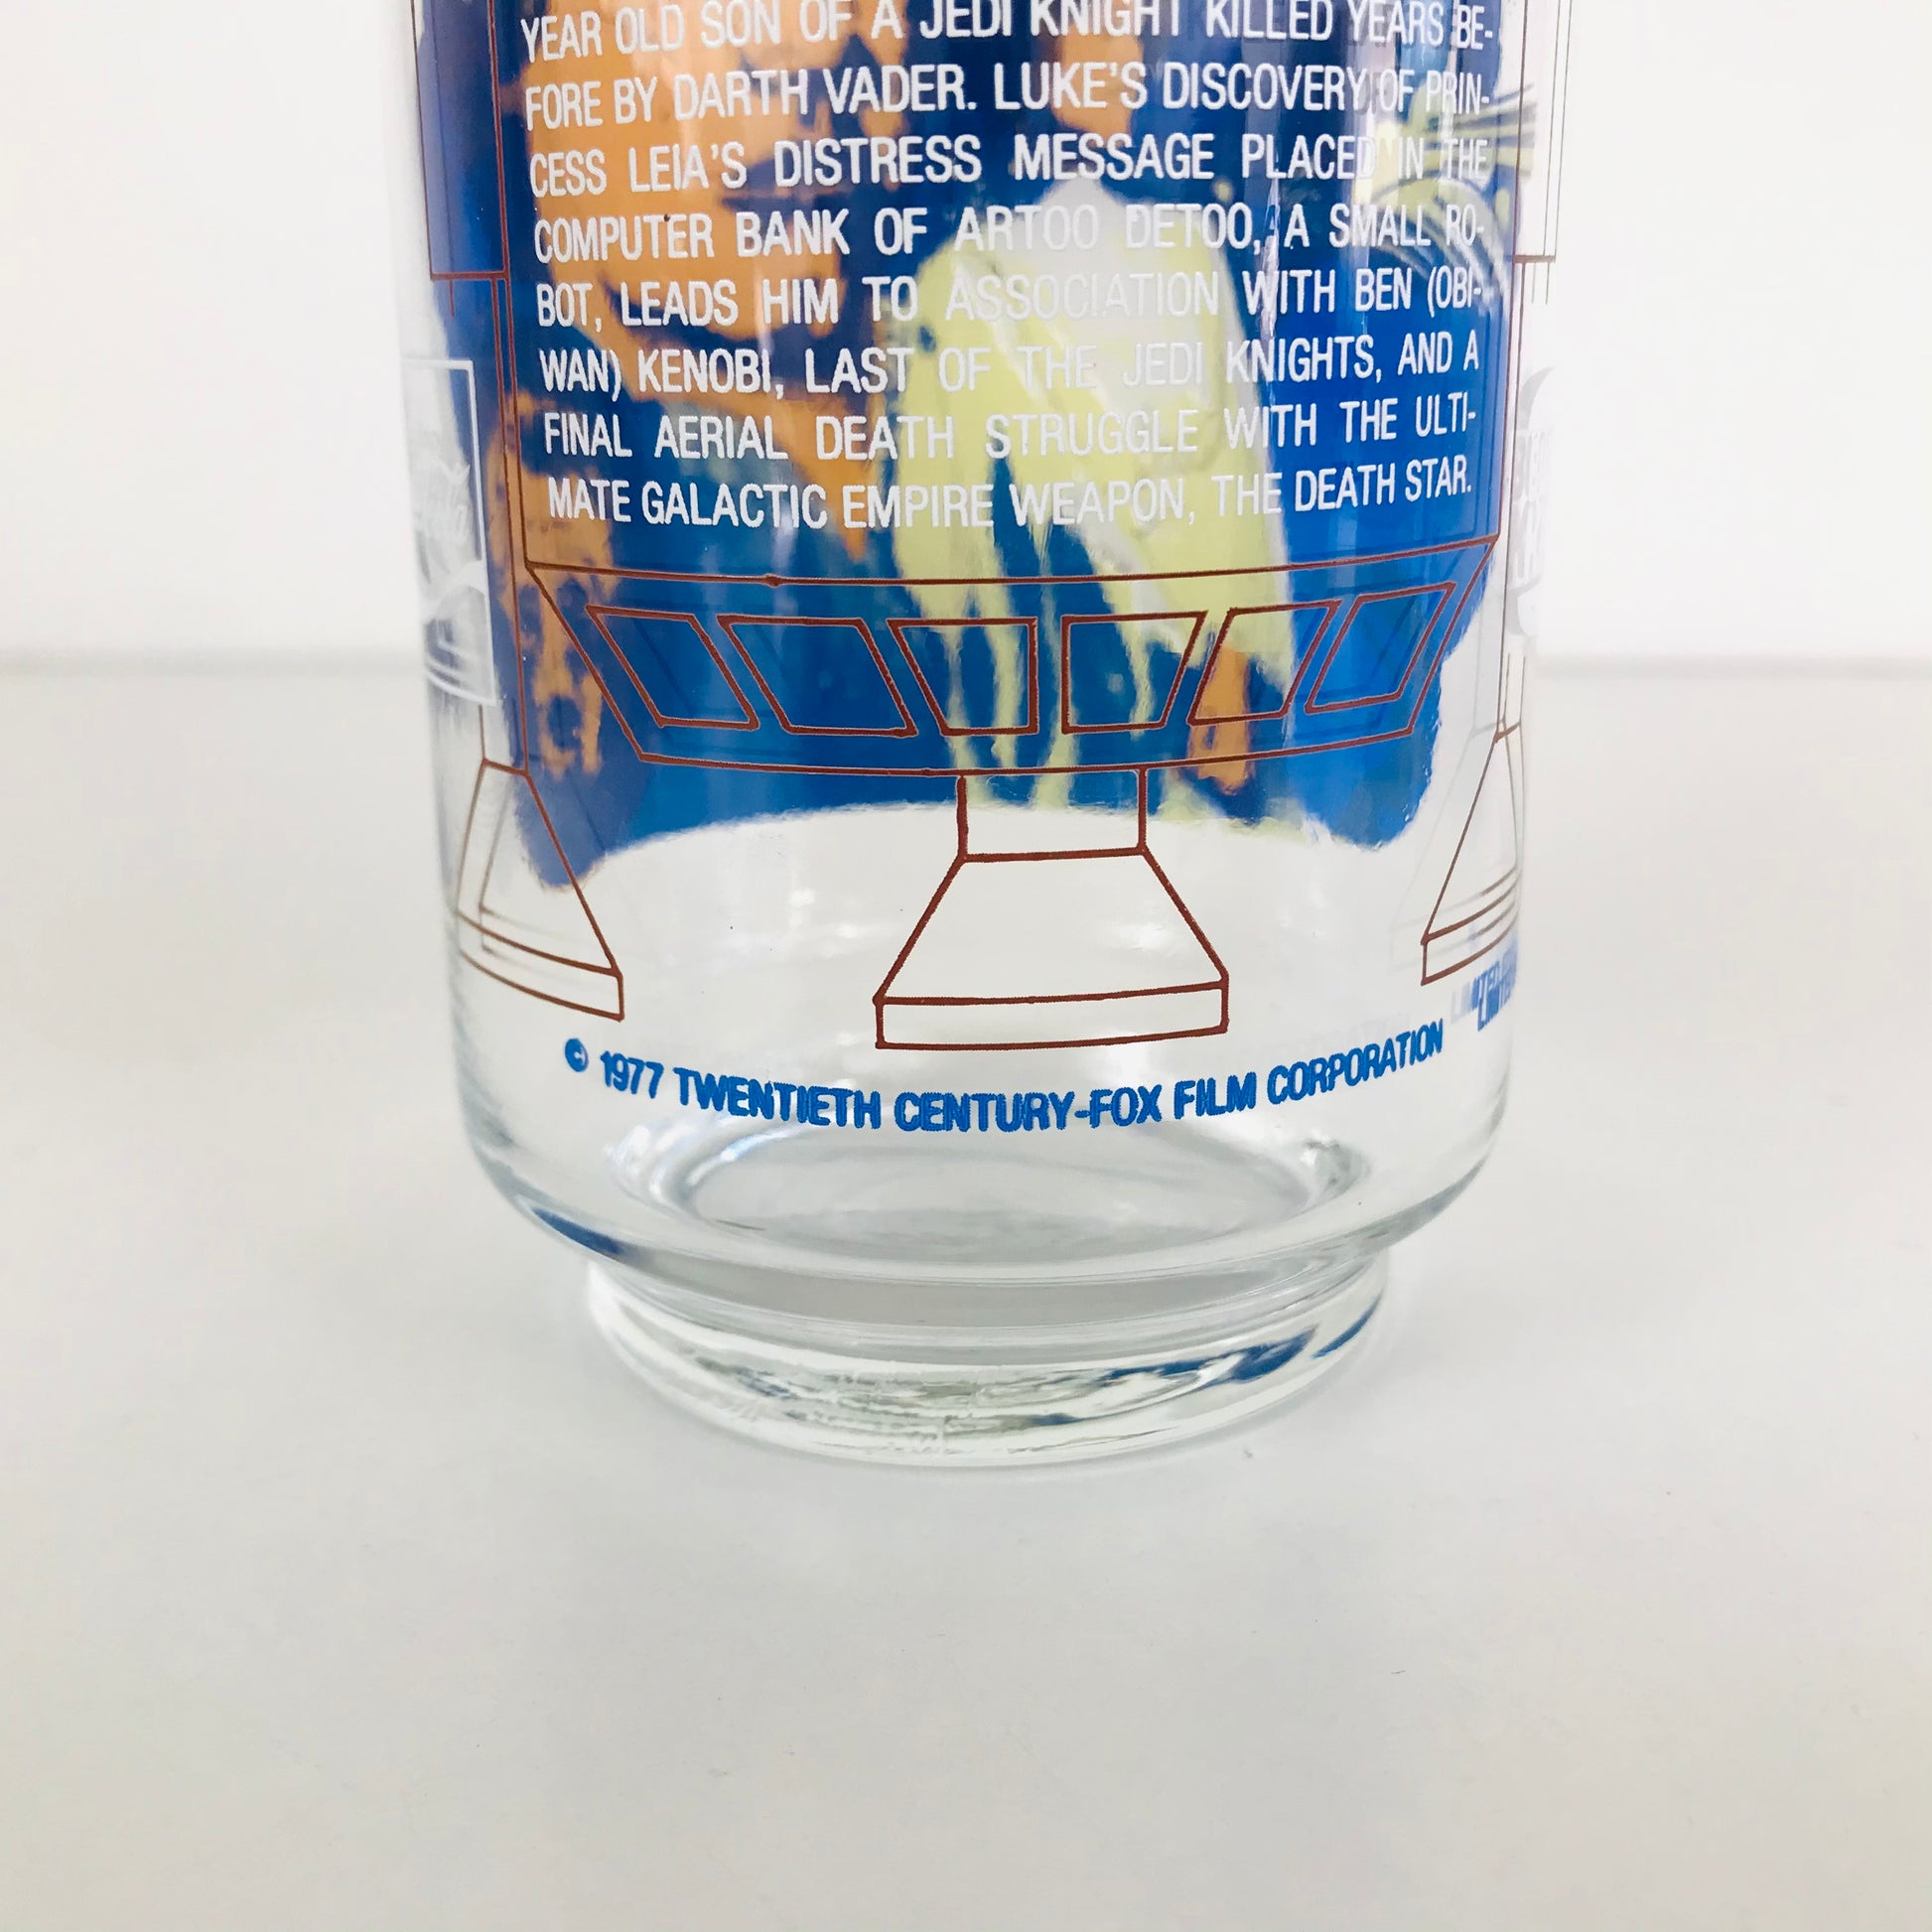 Back of the glass artwork of R2-D2's legs with the text "1977 Twentieth Century-Fox Film Corporation" underneath.